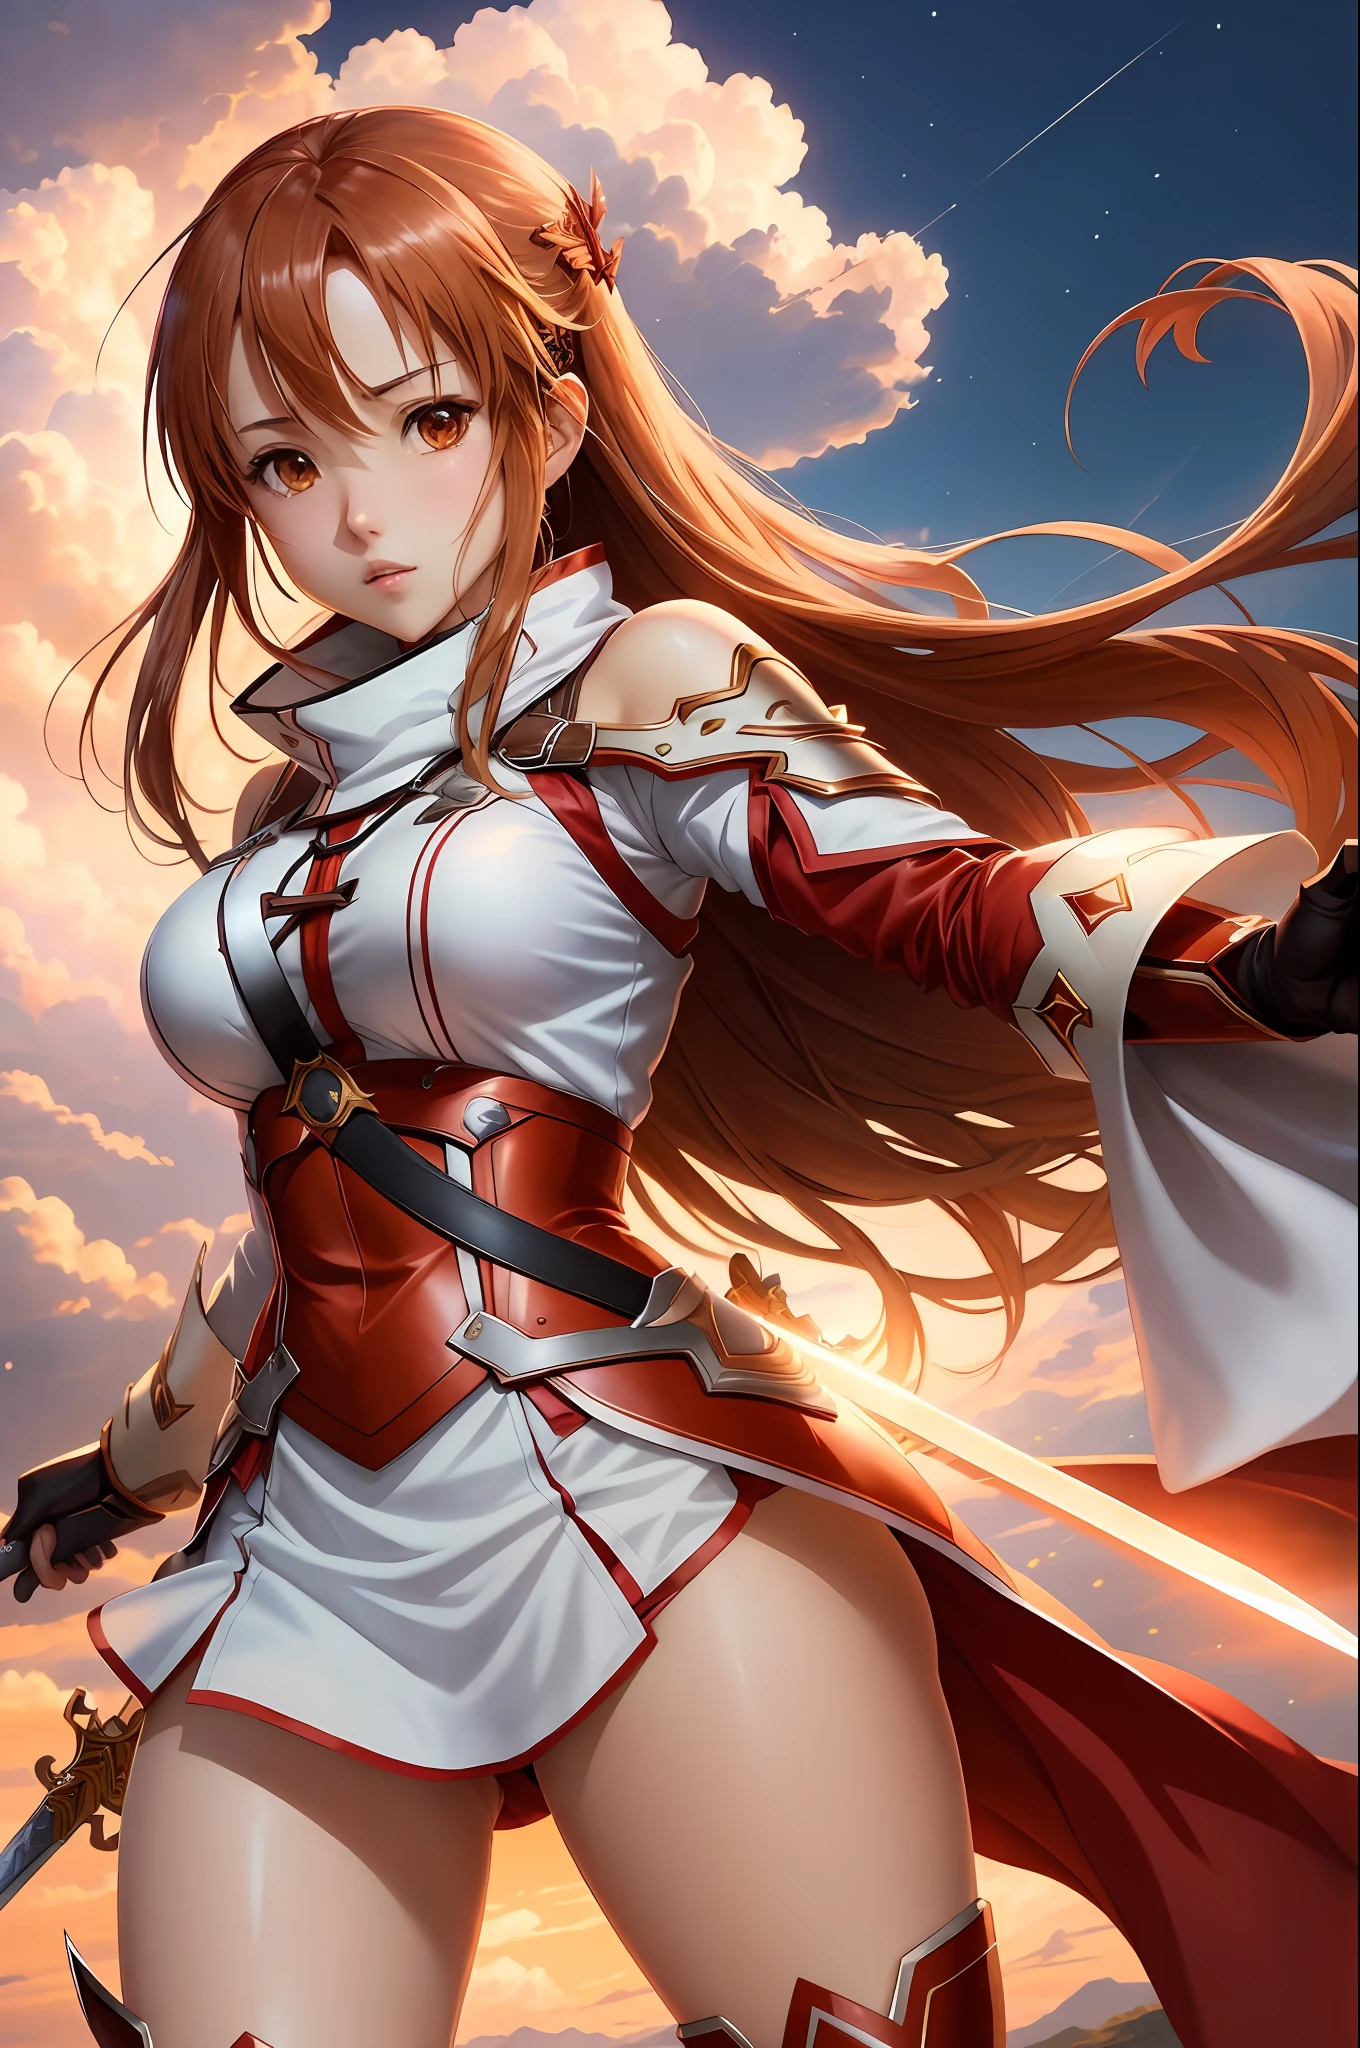 (style: anime, best quality), Asuna Yuuki from Sword Art Online in a dynamic pose with her sword, distinctive facial features, and beautiful outfit. The scene has a striking visual impact, reminiscent of the style of Oh! Great. large breasts